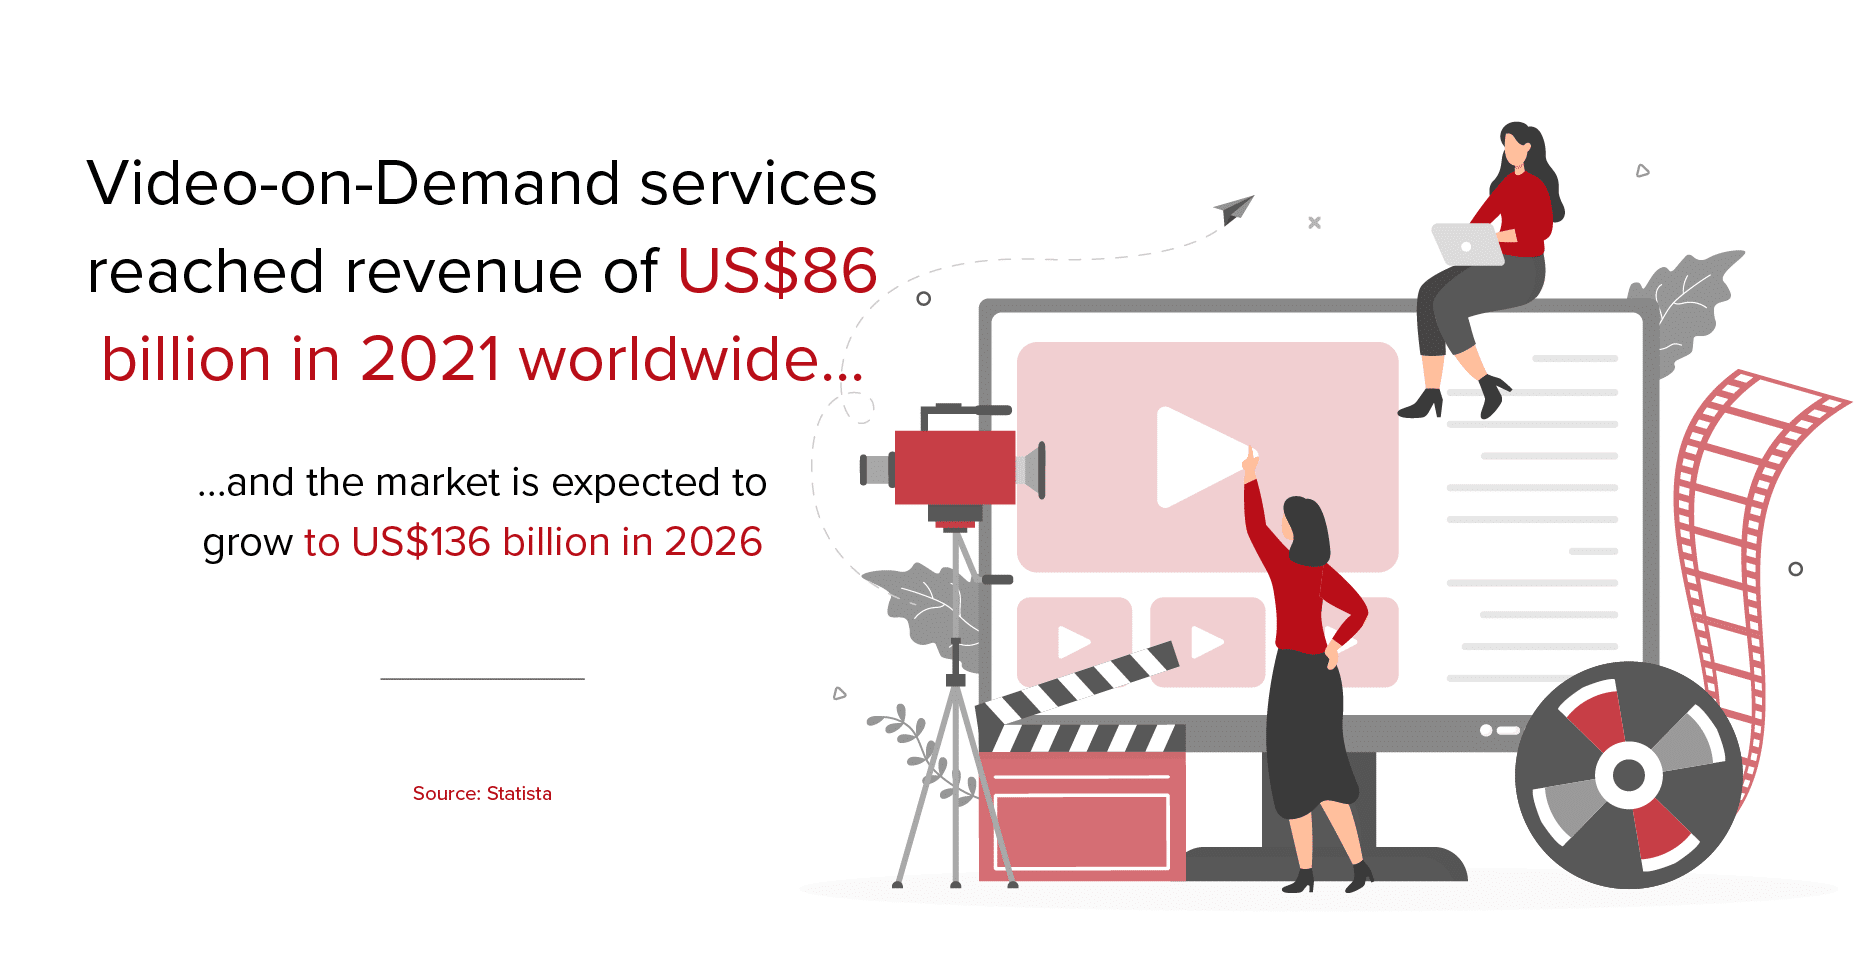 Video-on-Demand services